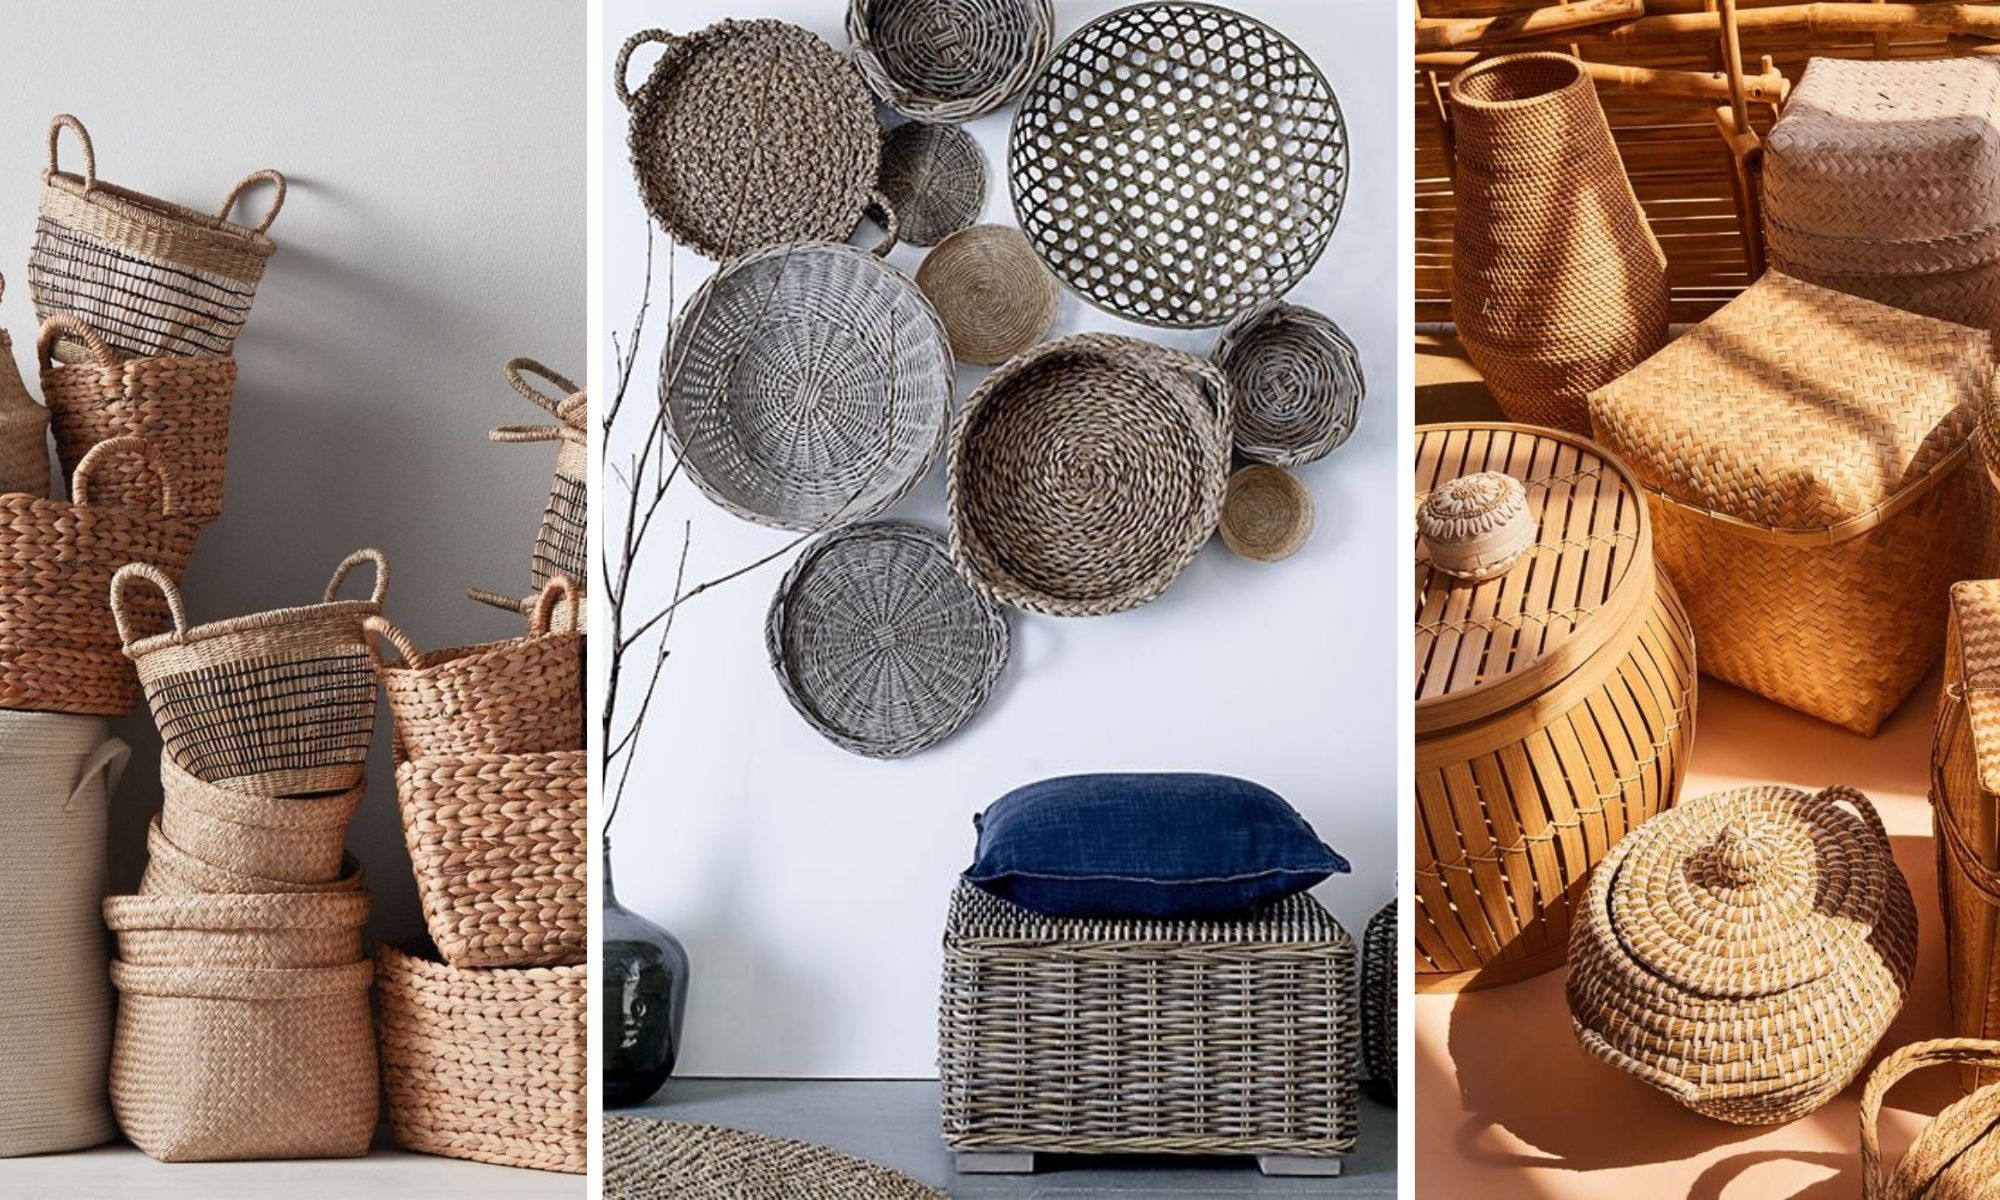 The Art of Basketry & India’s Indigenous Grasses